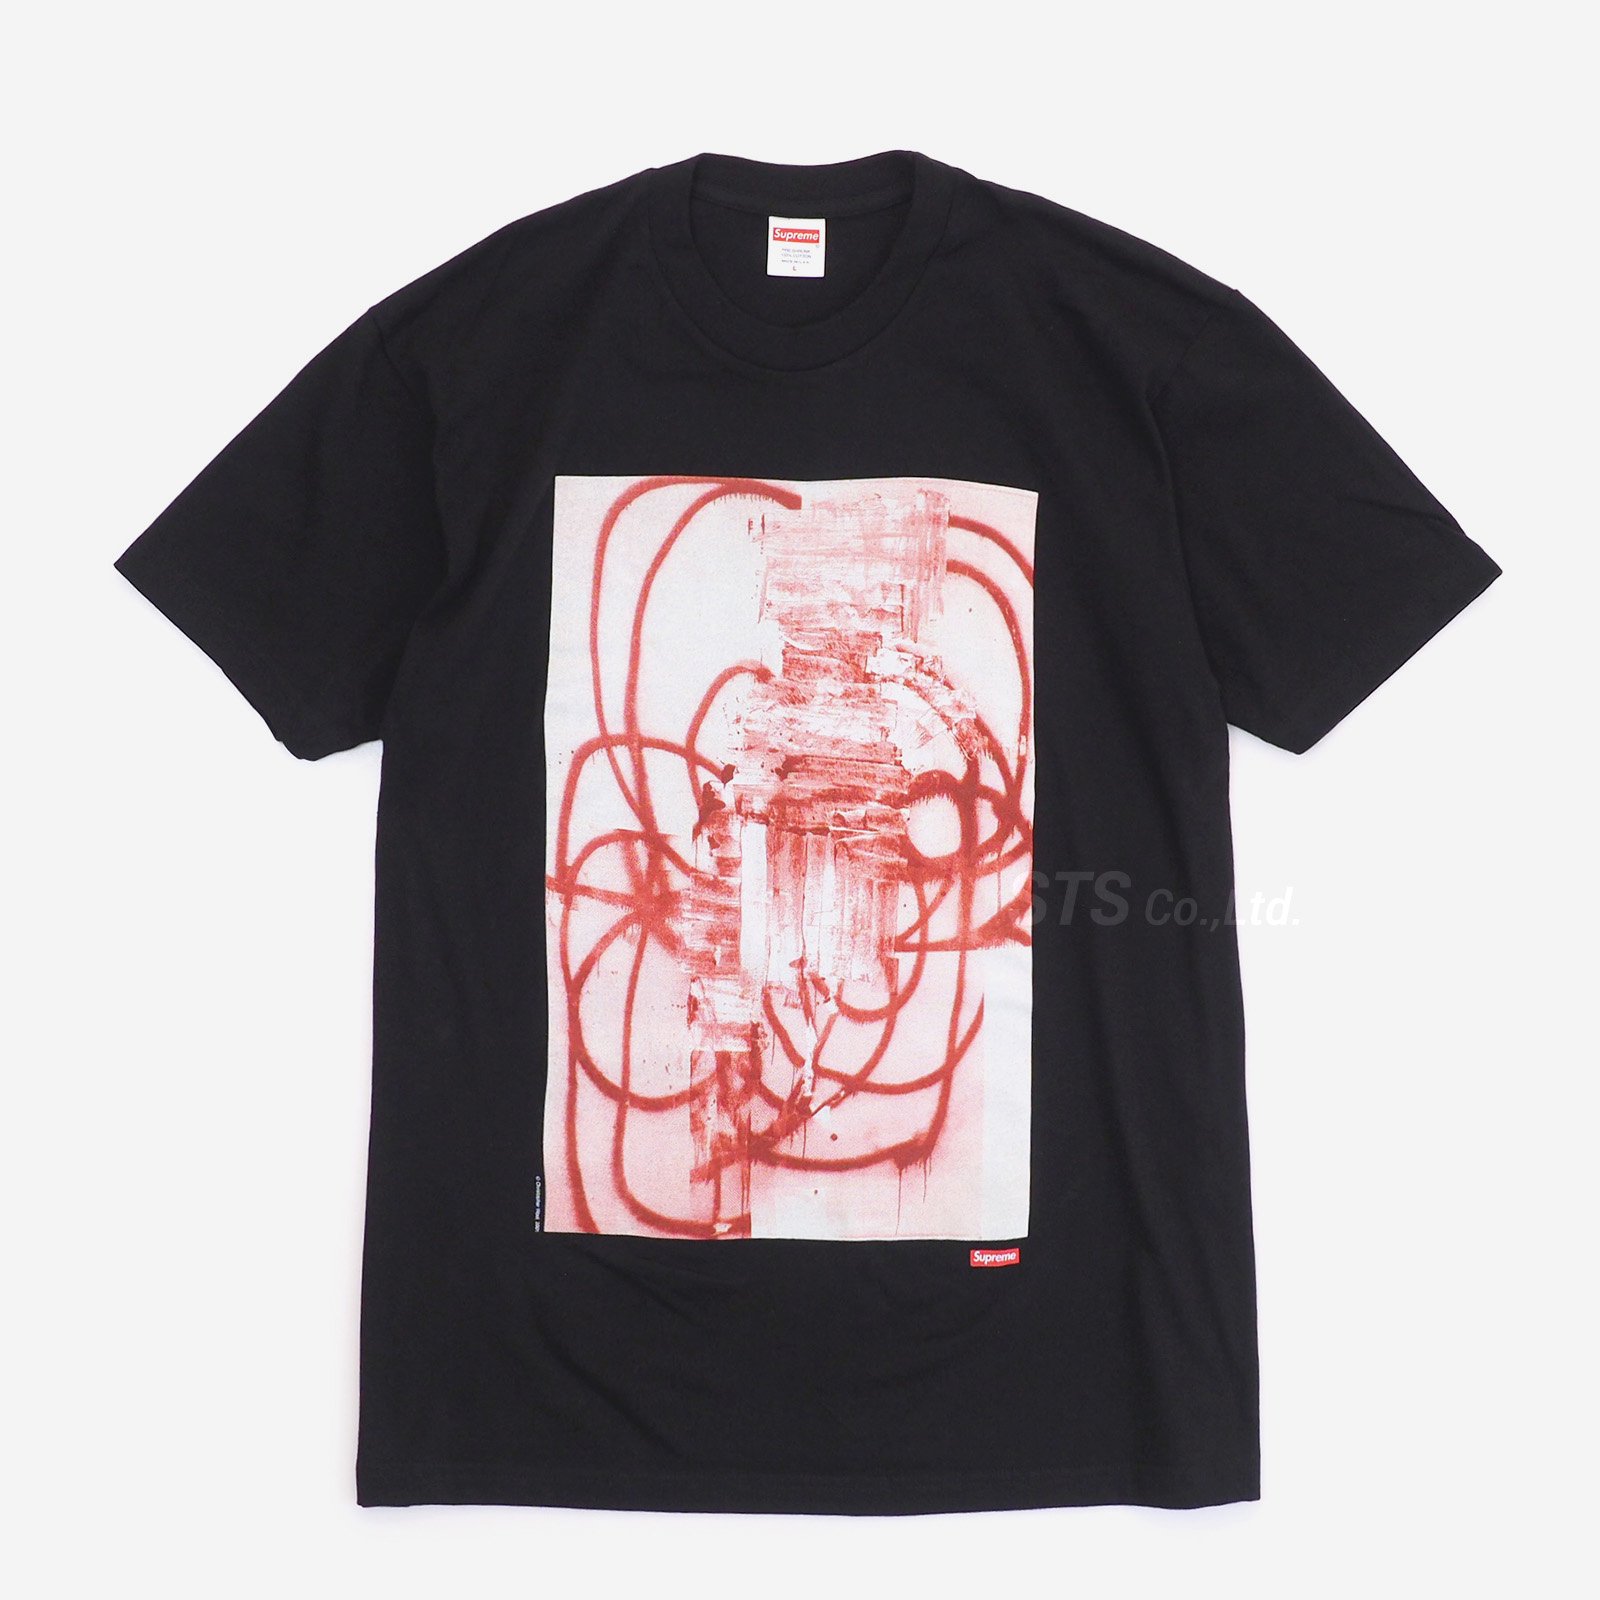 L☆黒☆Christopher Wool/Supreme 2001 Tee - Tシャツ/カットソー(半袖